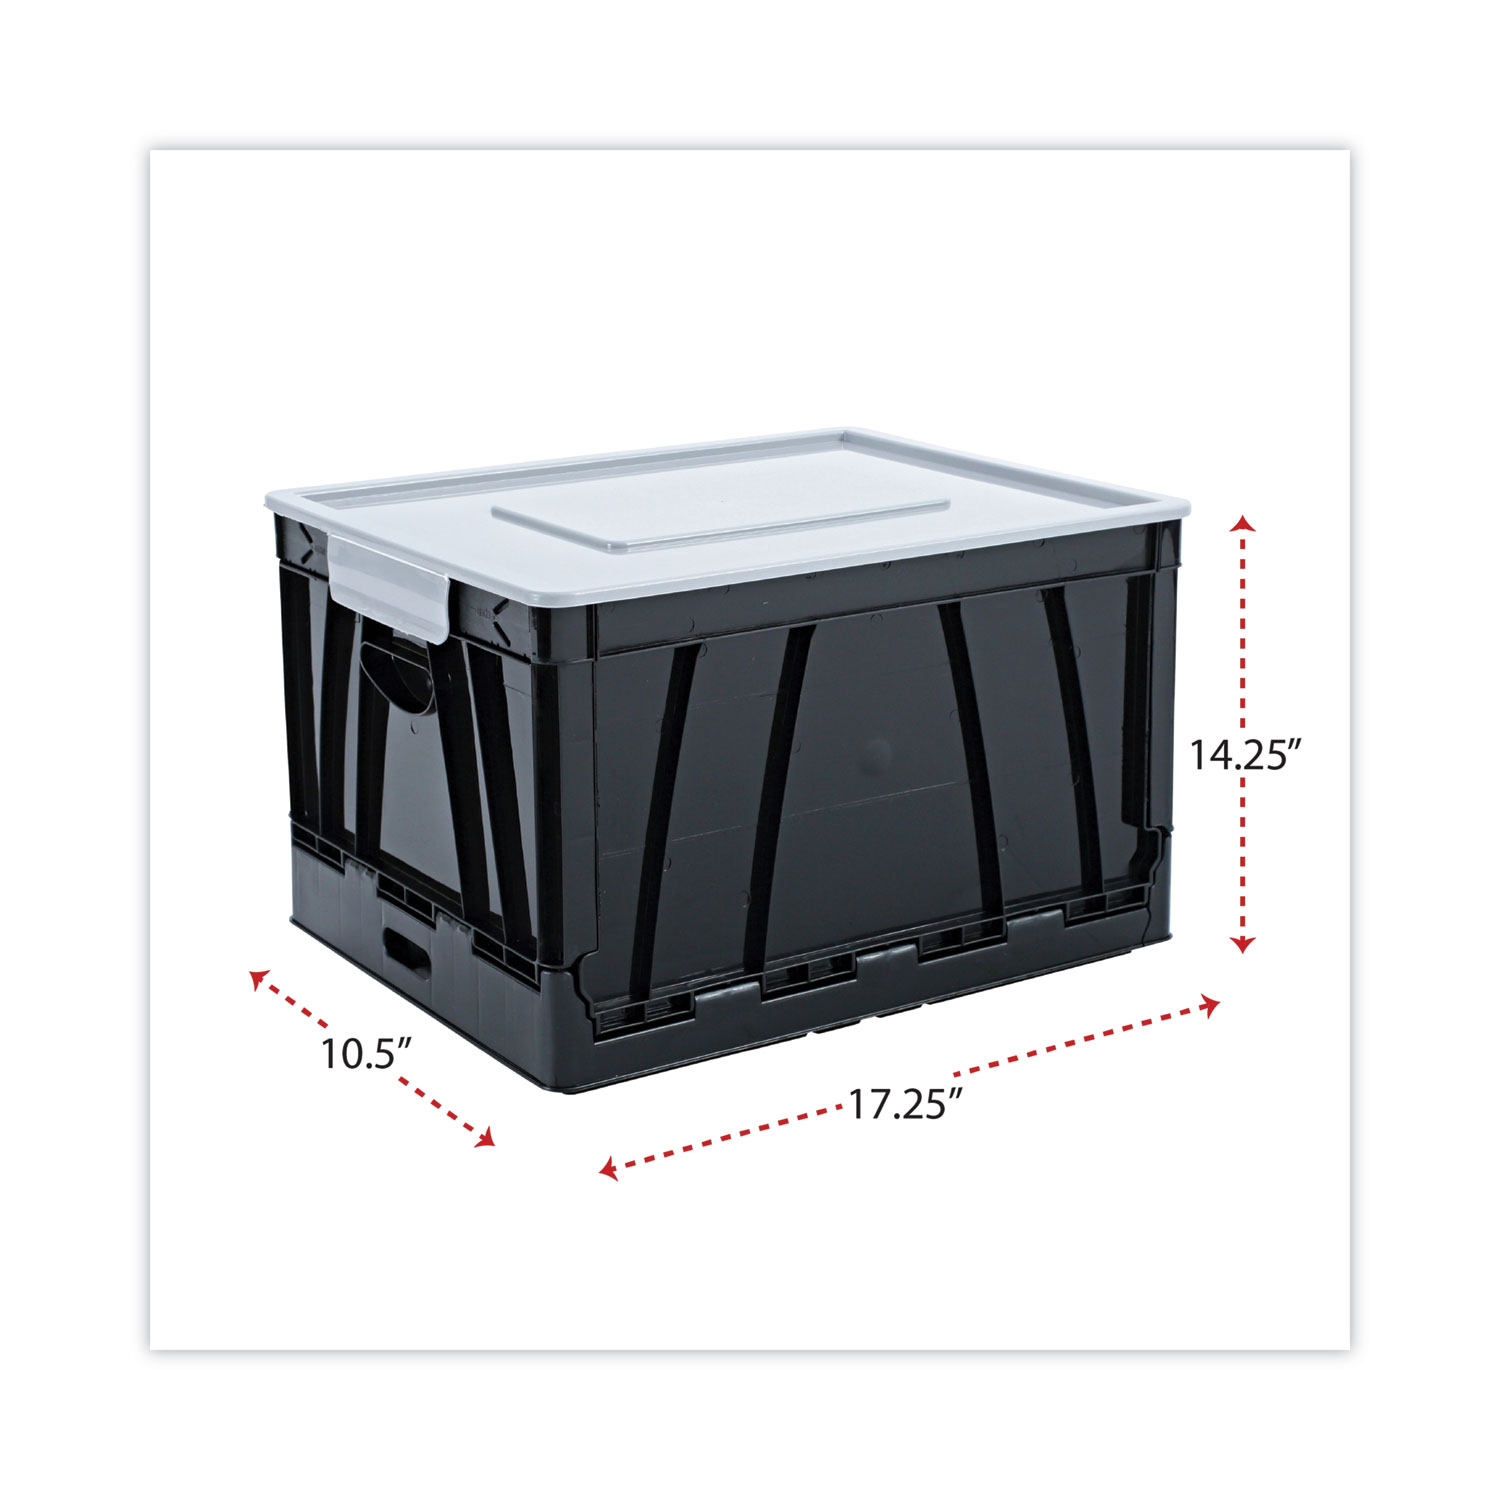 Heavy-Duty Fast Assembly Lift-Off Lid Storage Box, Letter/Legal